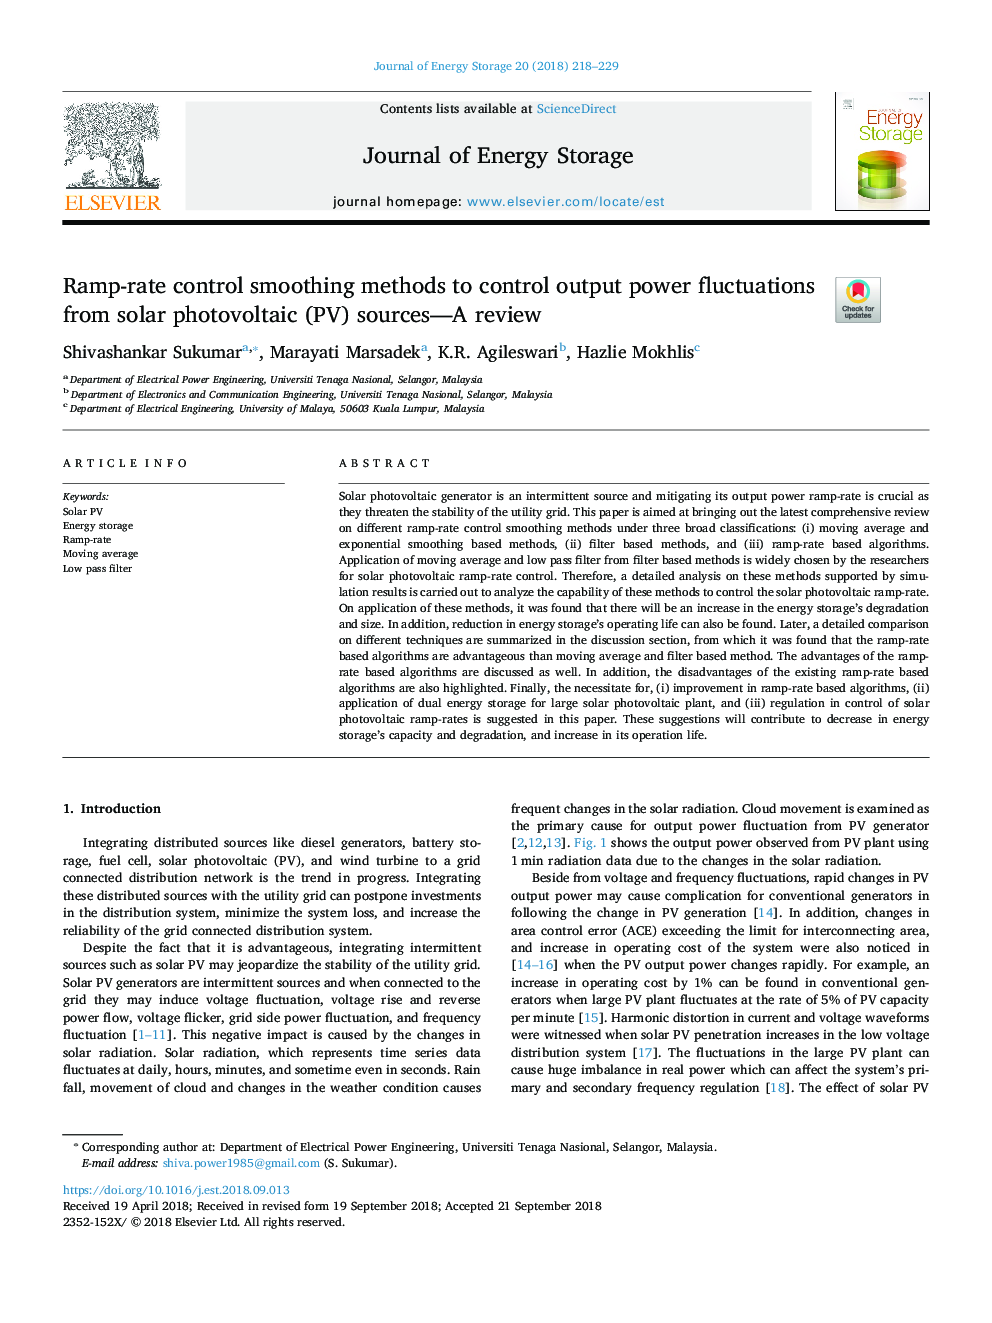 Ramp-rate control smoothing methods to control output power fluctuations from solar photovoltaic (PV) sources-A review